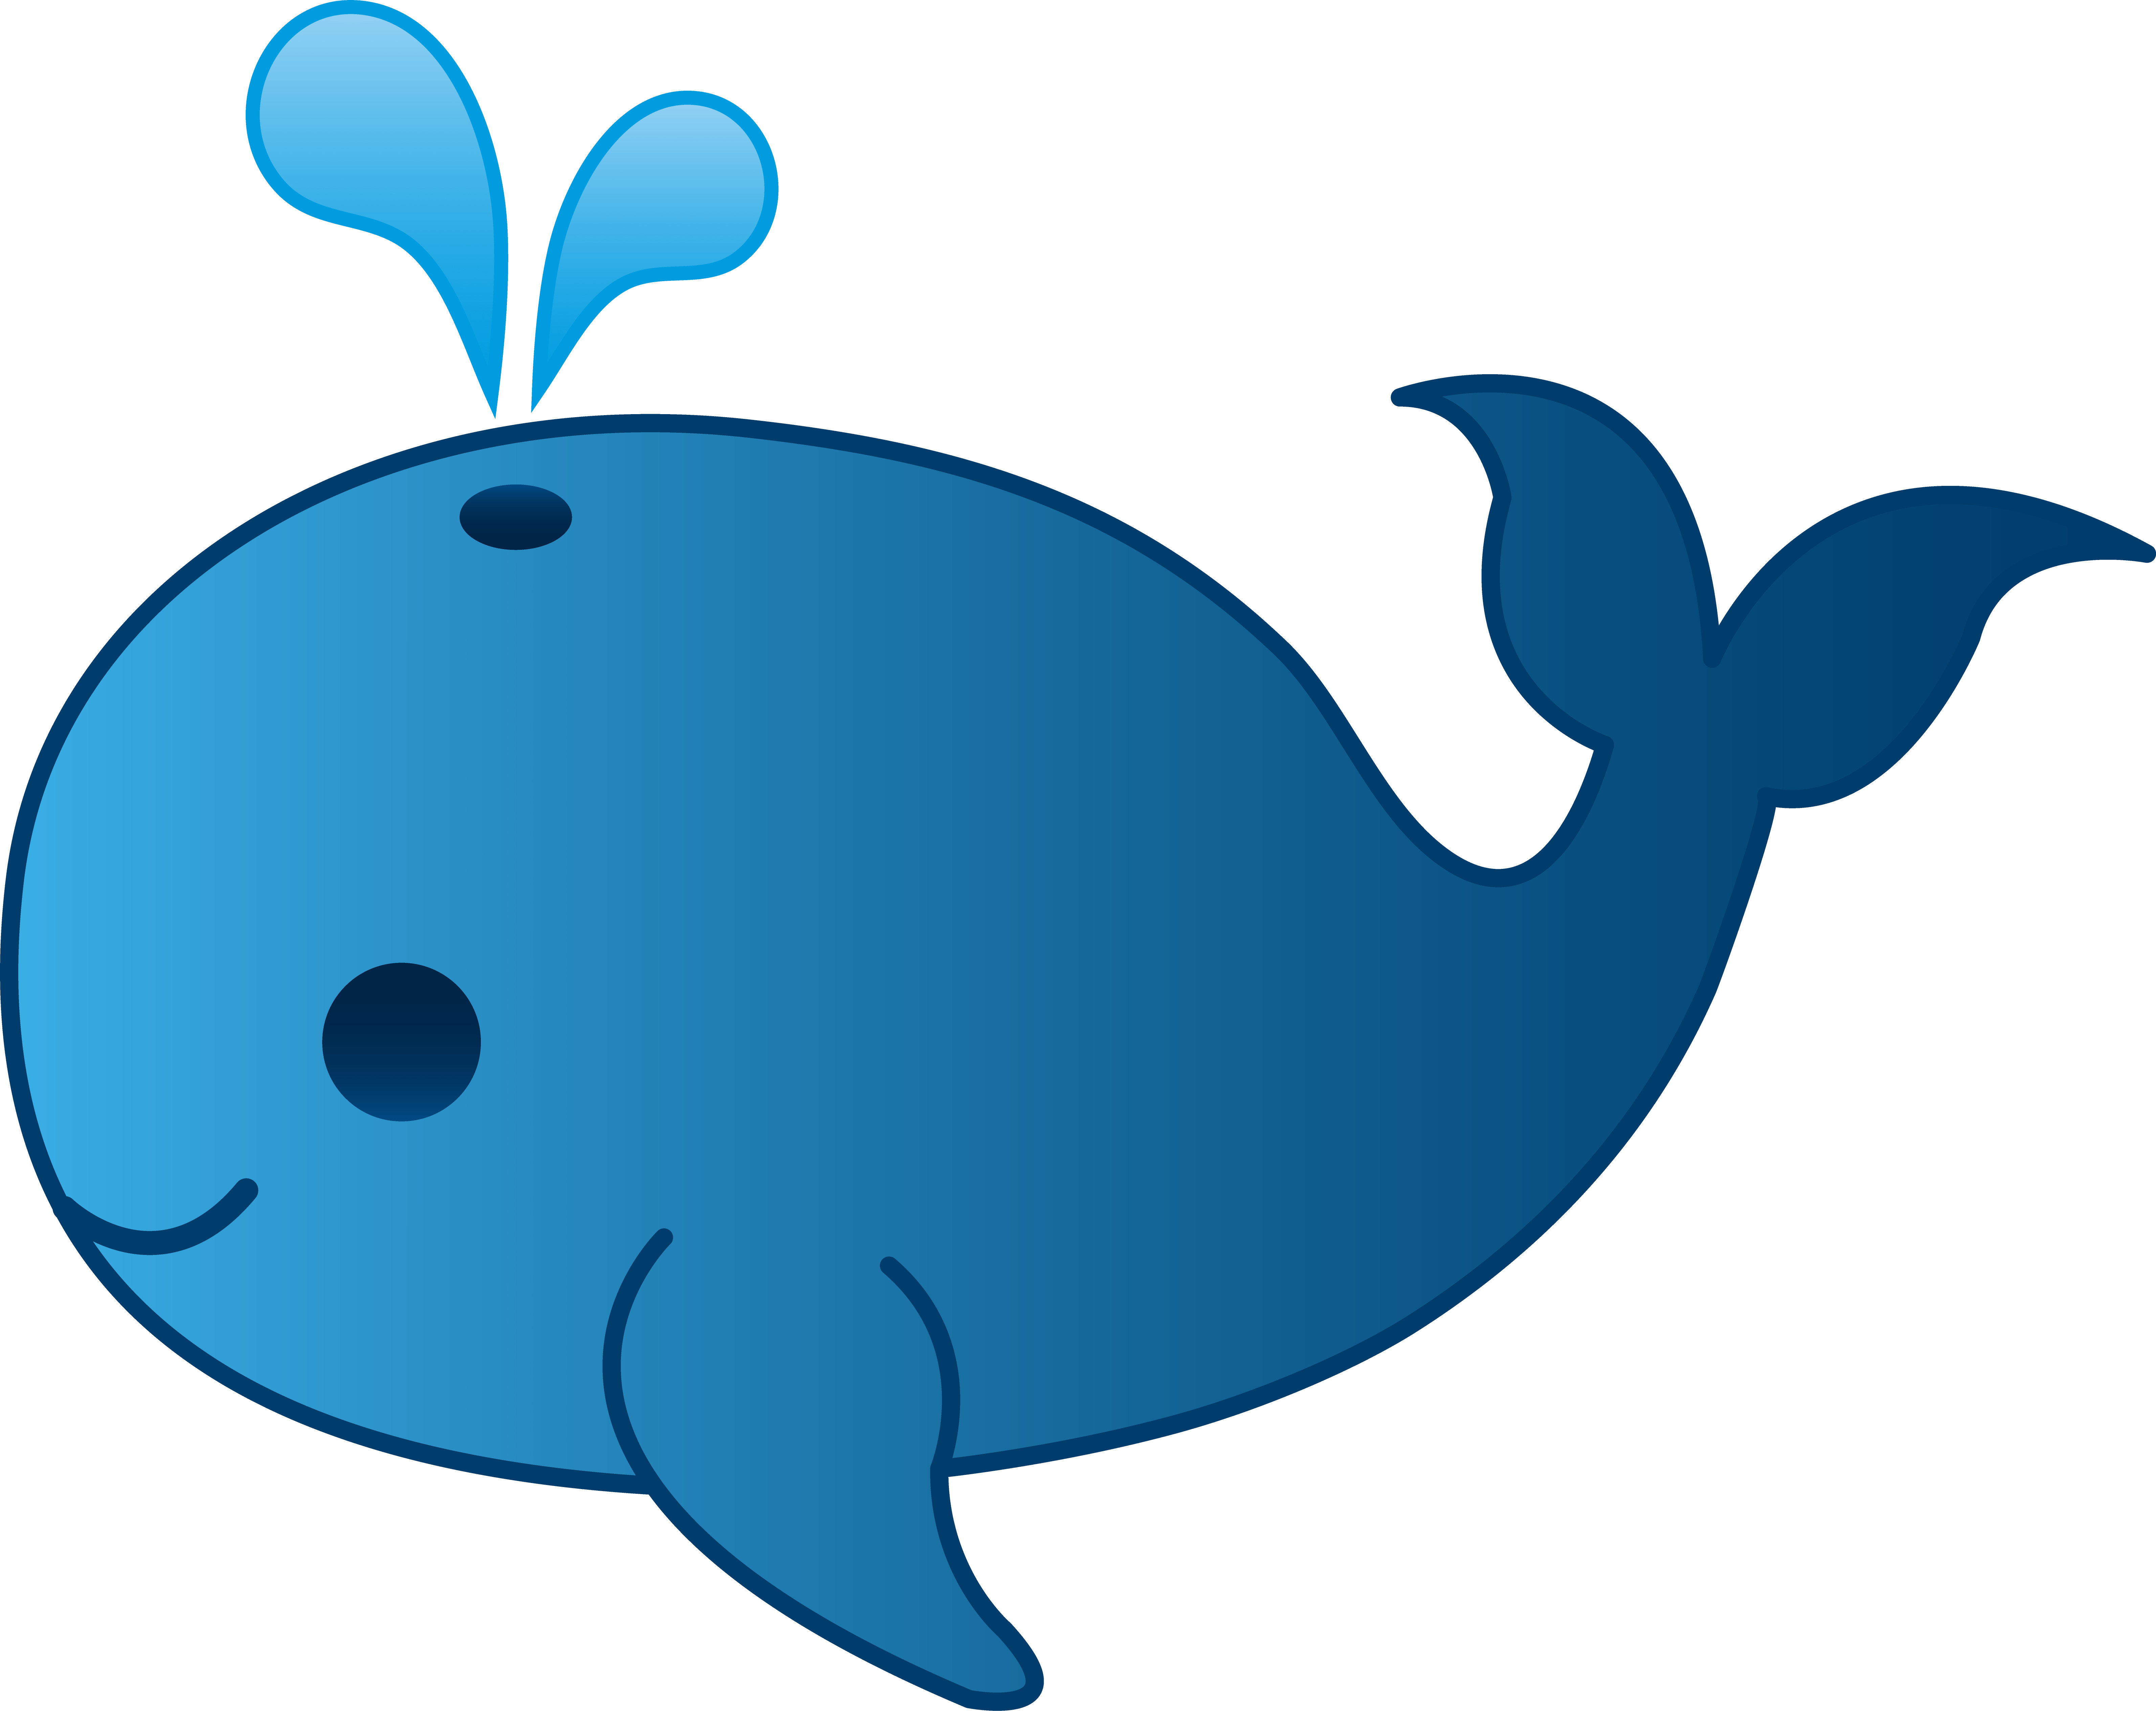 Dolphins clipart under sea. Daphney dolphin and whippy